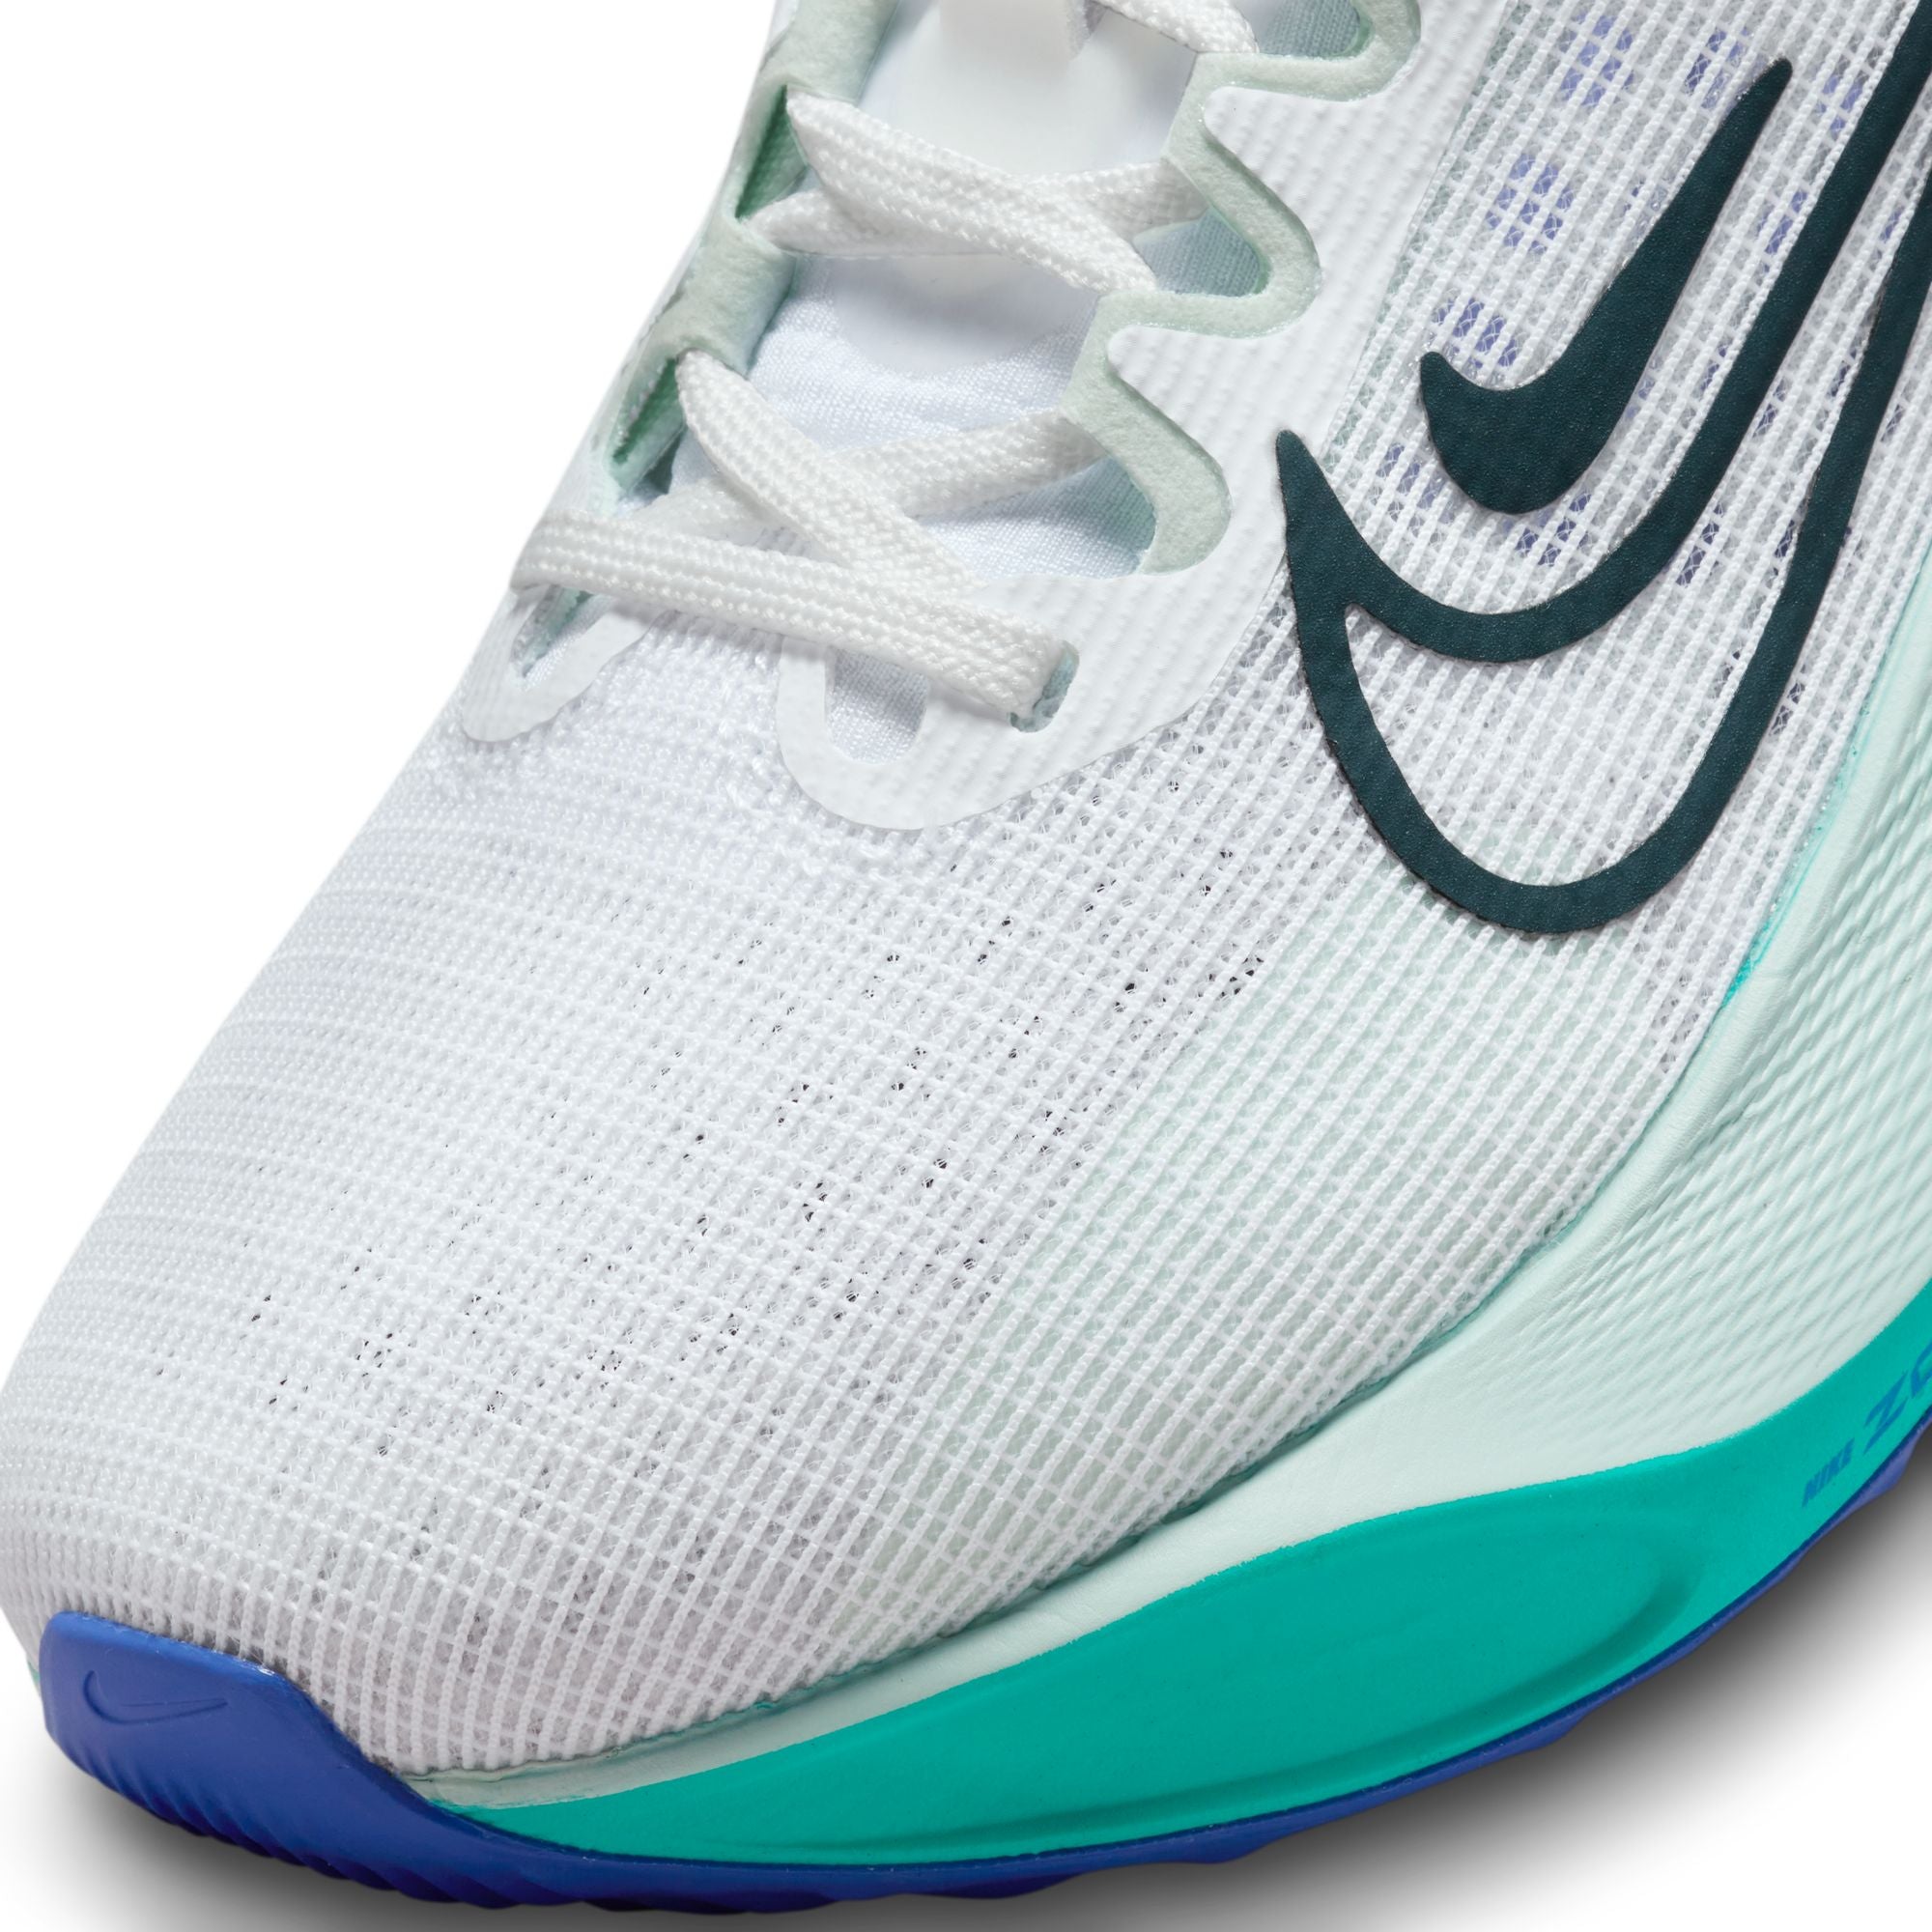 NIKE ZOOM FLY 5 DM8974-101 RUNNING SHOES (W)